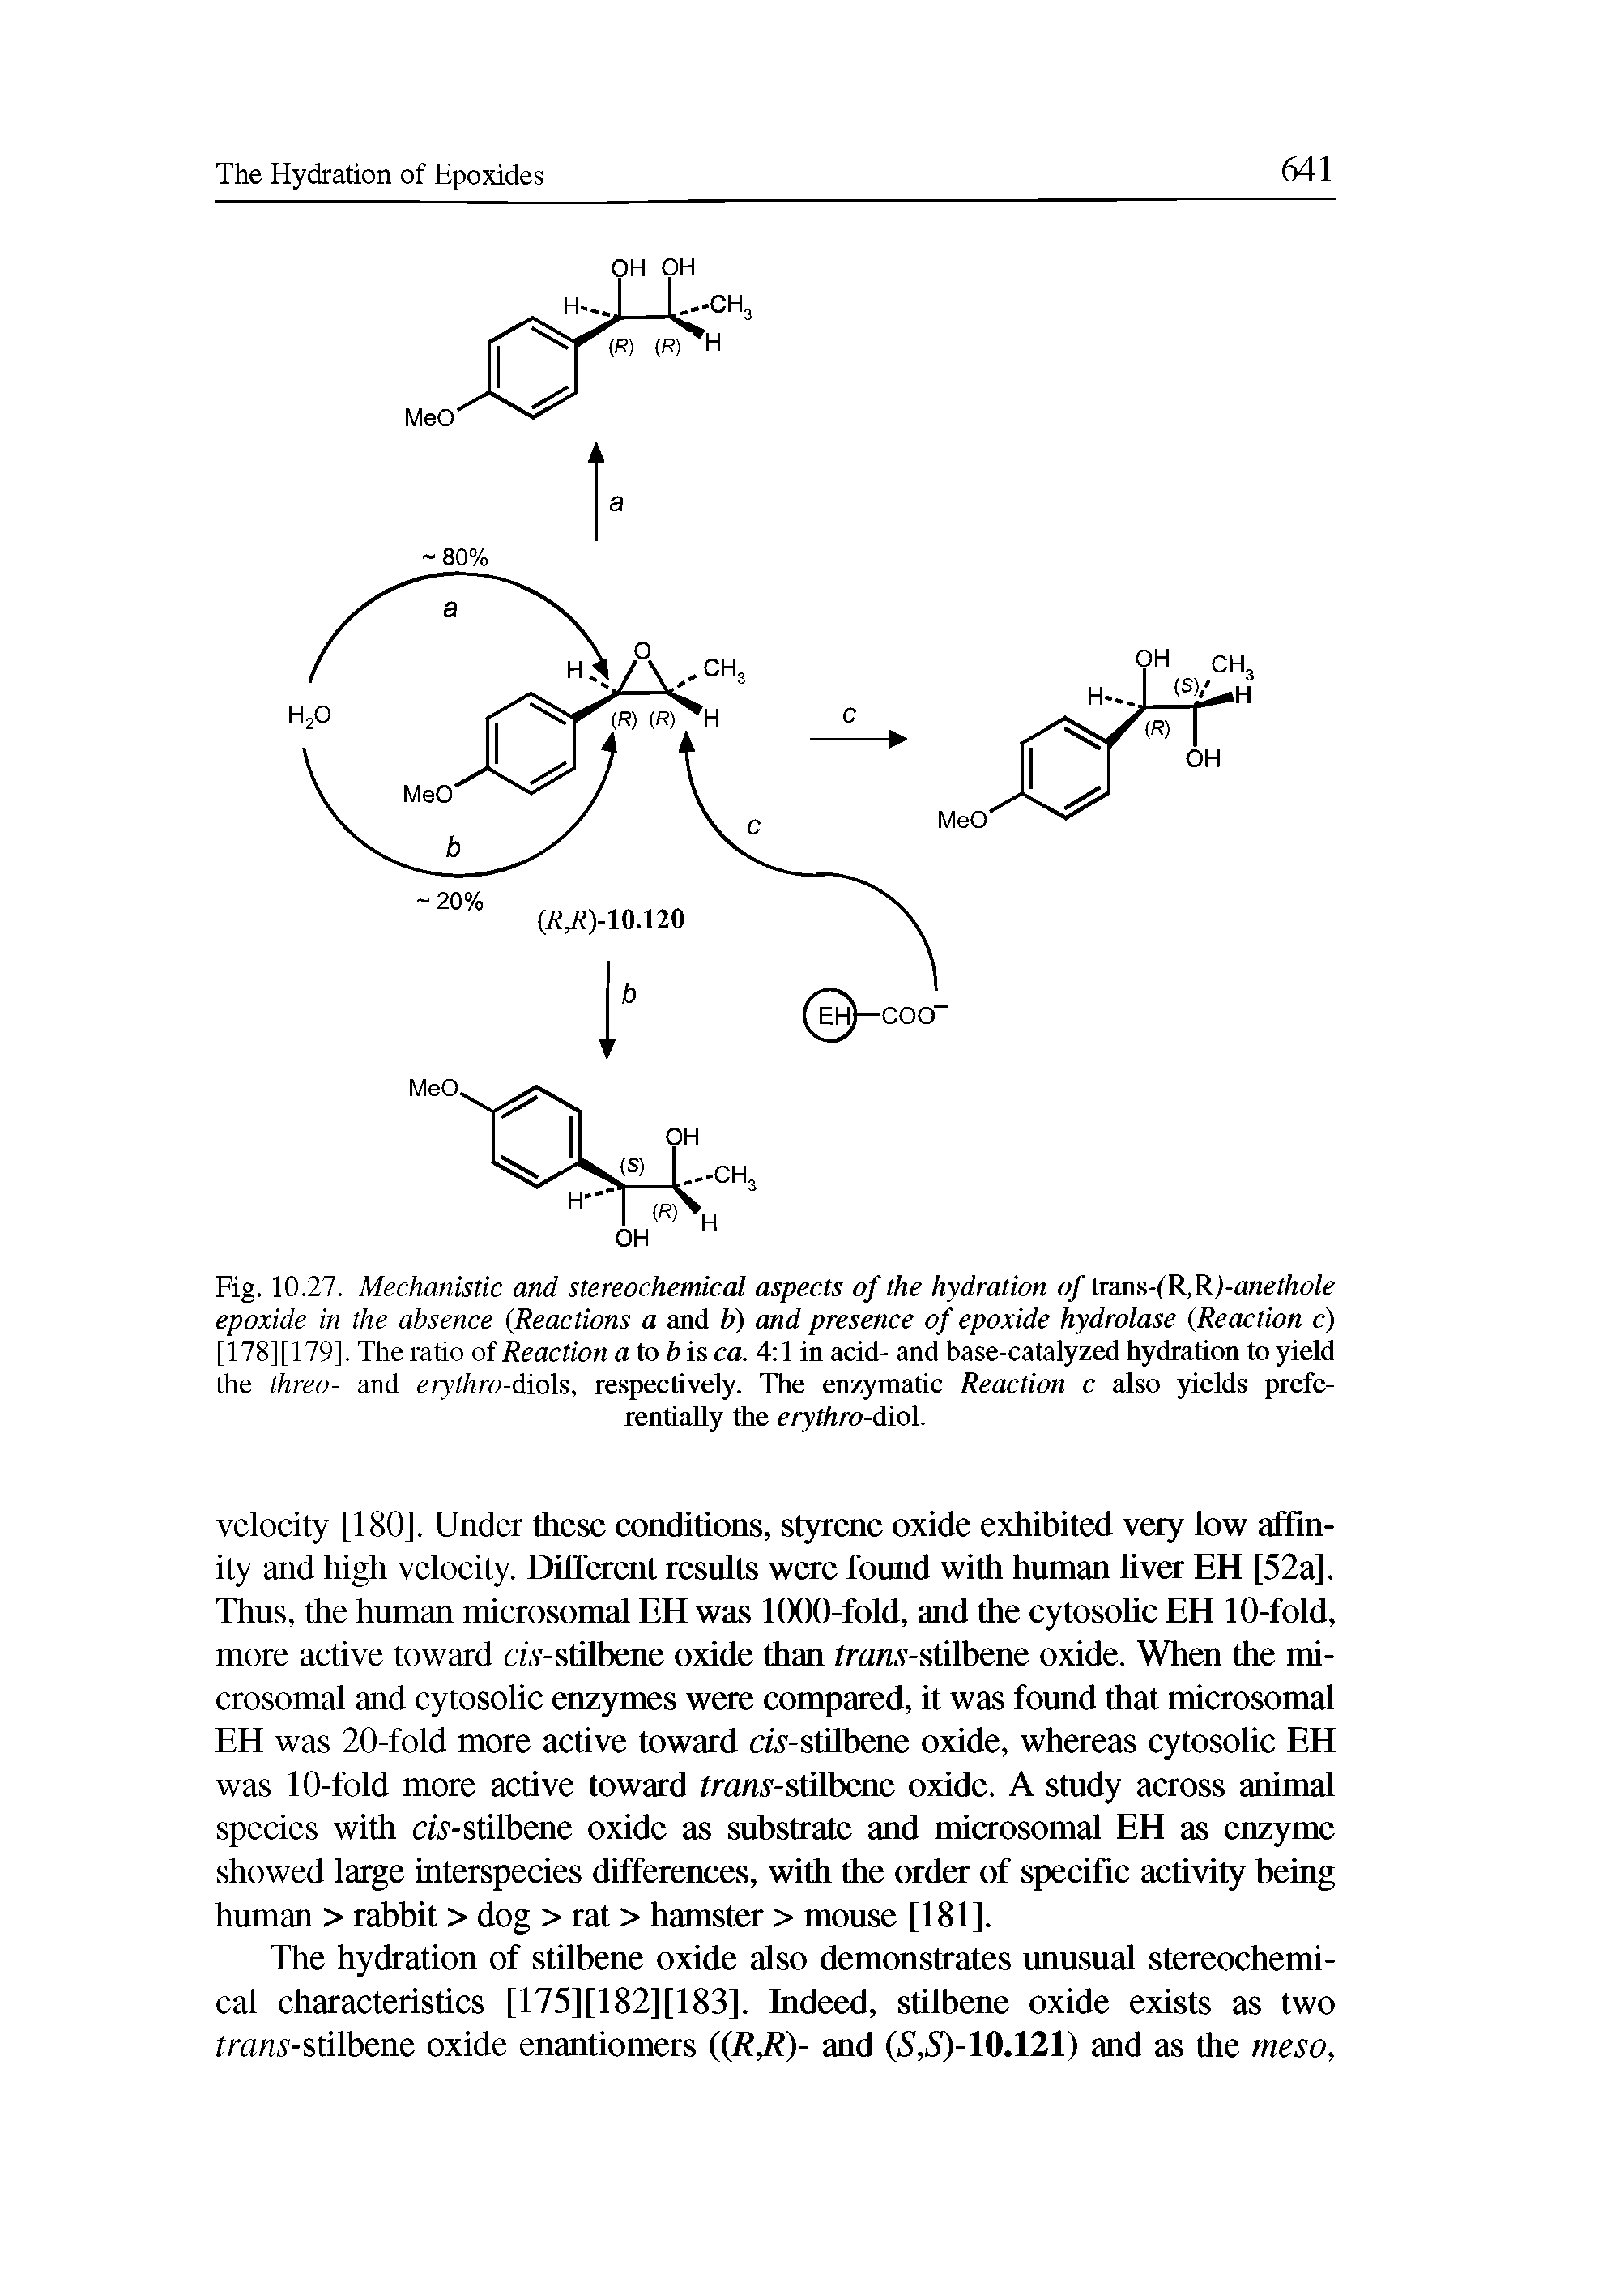 Fig. 10.27. Mechanistic and stereochemical aspects of the hydration of trans-(R,K)-anethole epoxide in the absence (Reactions a and b) and presence of epoxide hydrolase (Reaction c) [178][179]. The ratio of Reaction a to bis ca. 4 1 in acid- and base-catalyzed hydration to yield the threo- and erythro-diols, respectively. The enzymatic Reaction c also yields preferentially the erythro-diol.